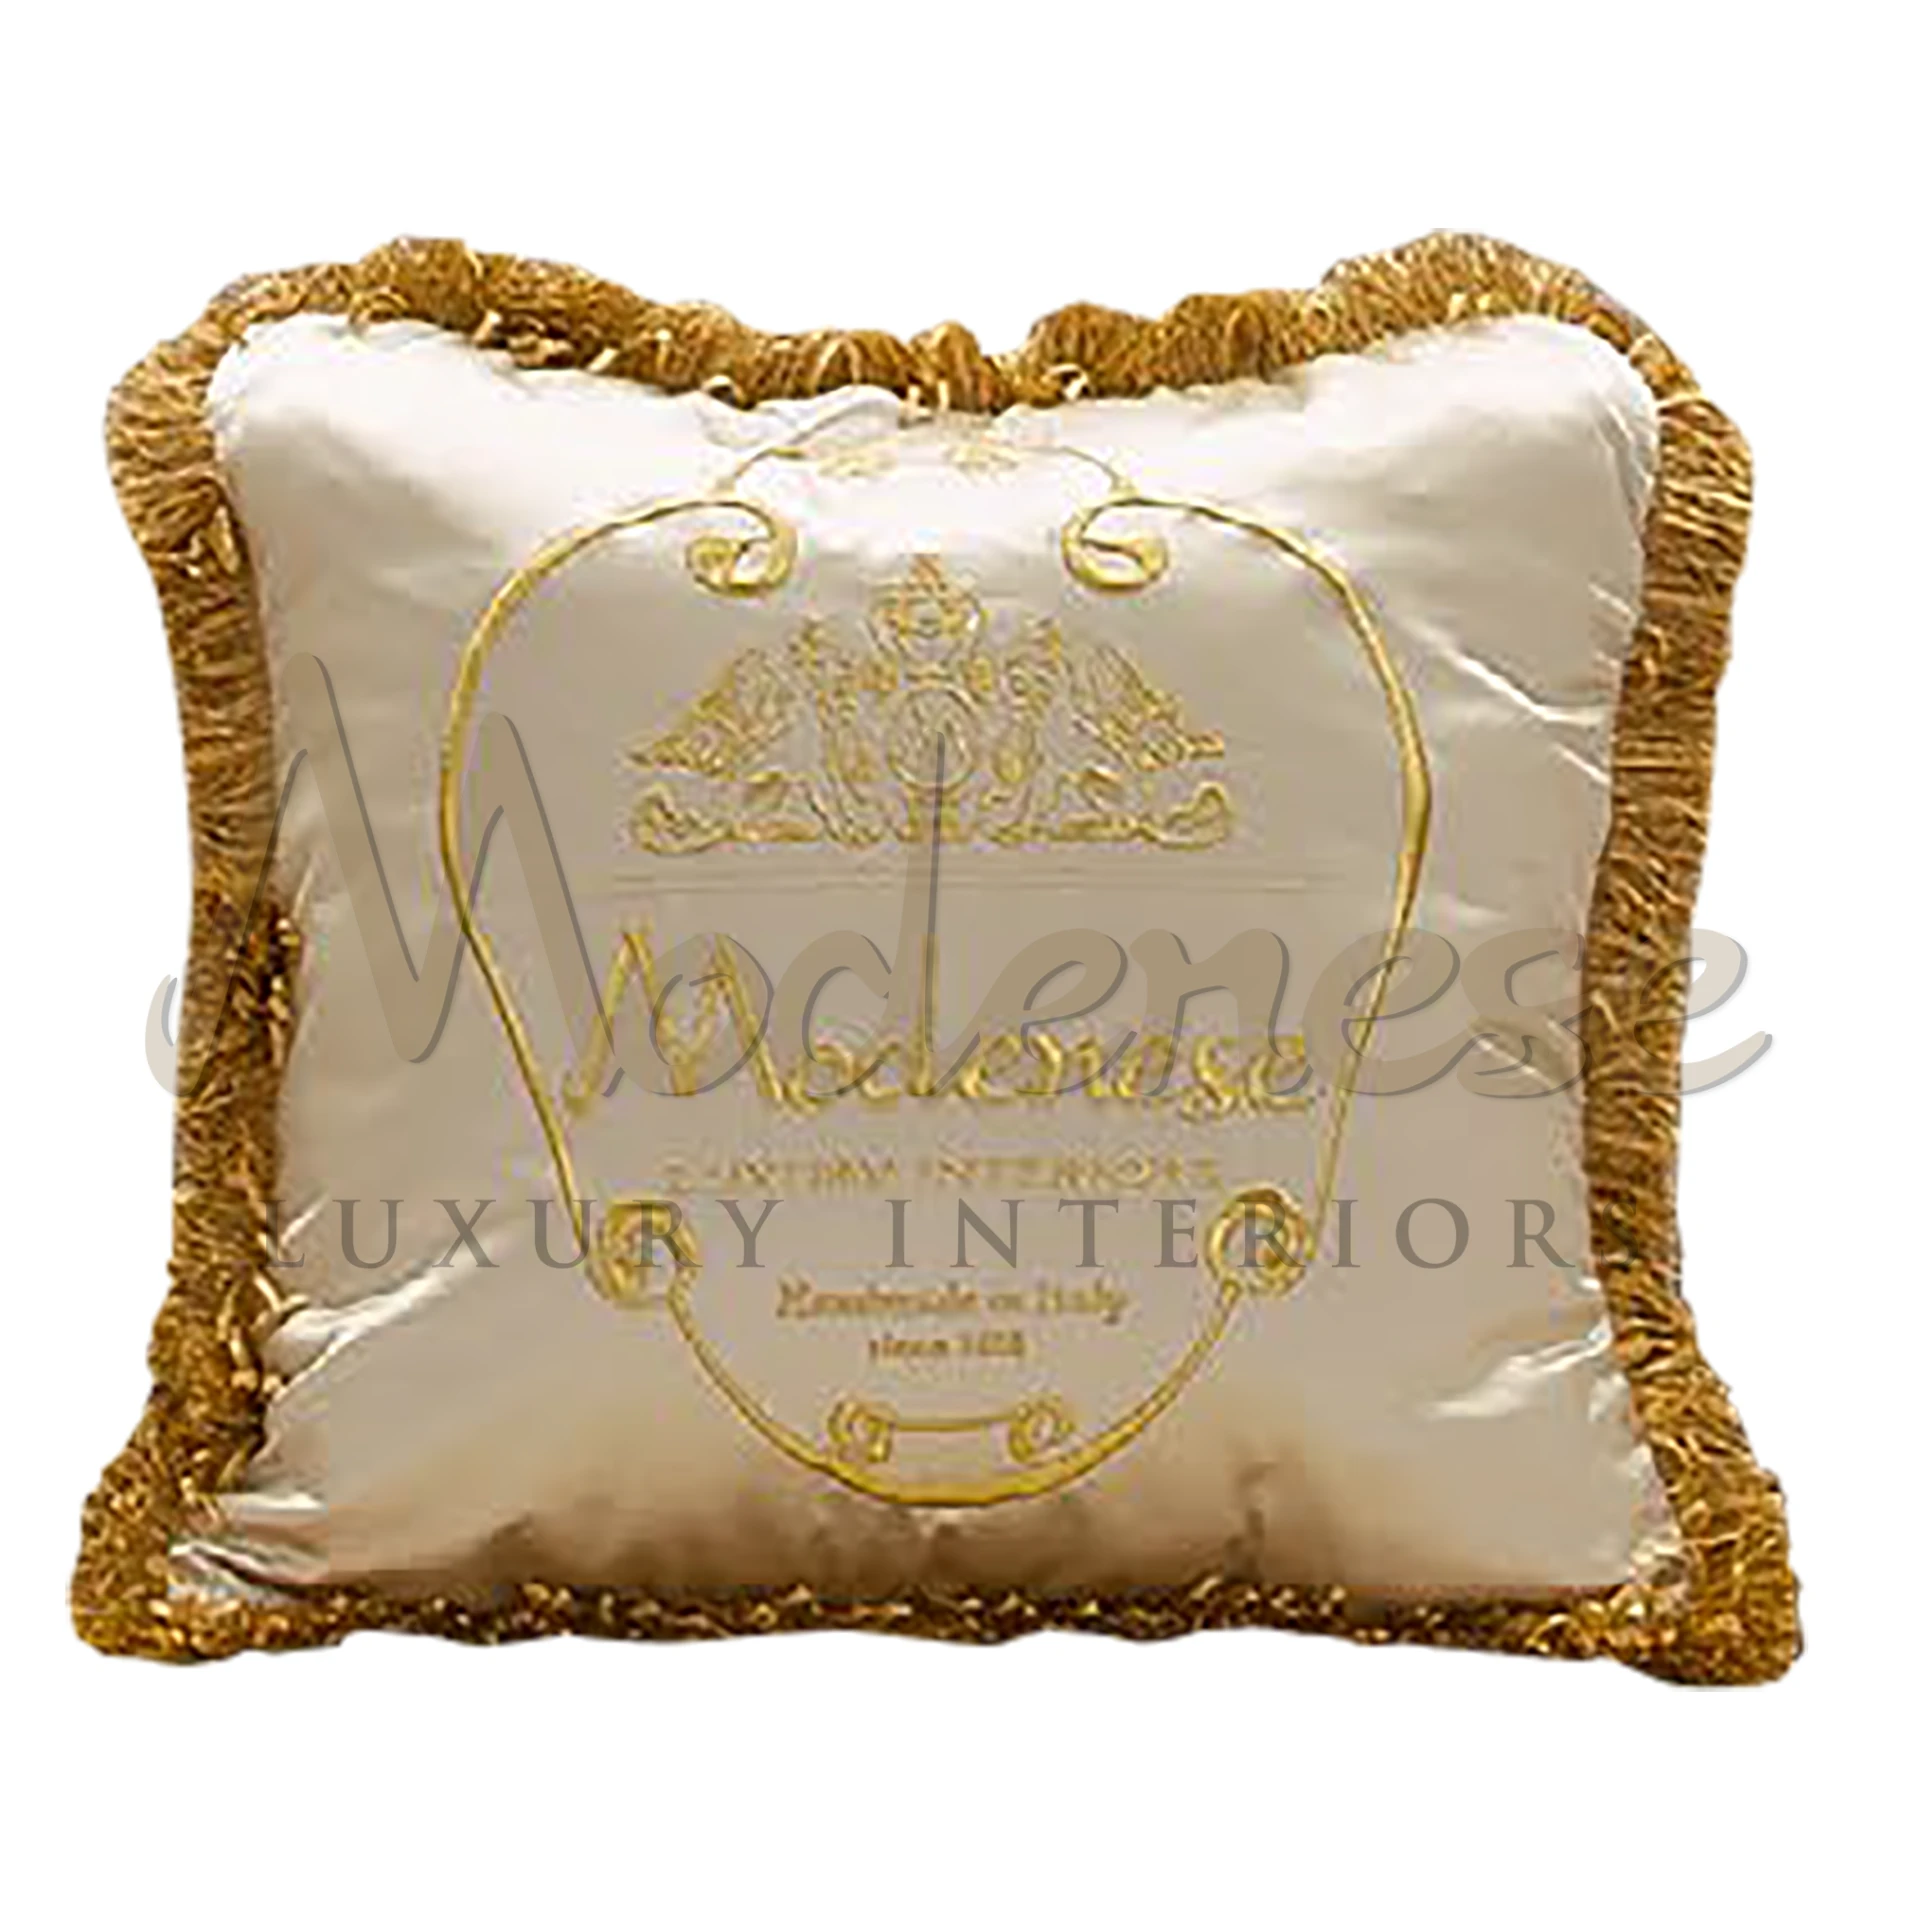 Designer Modenese Pillow: A testament to exquisite craftsmanship, representing the highest standards of quality and elegance.